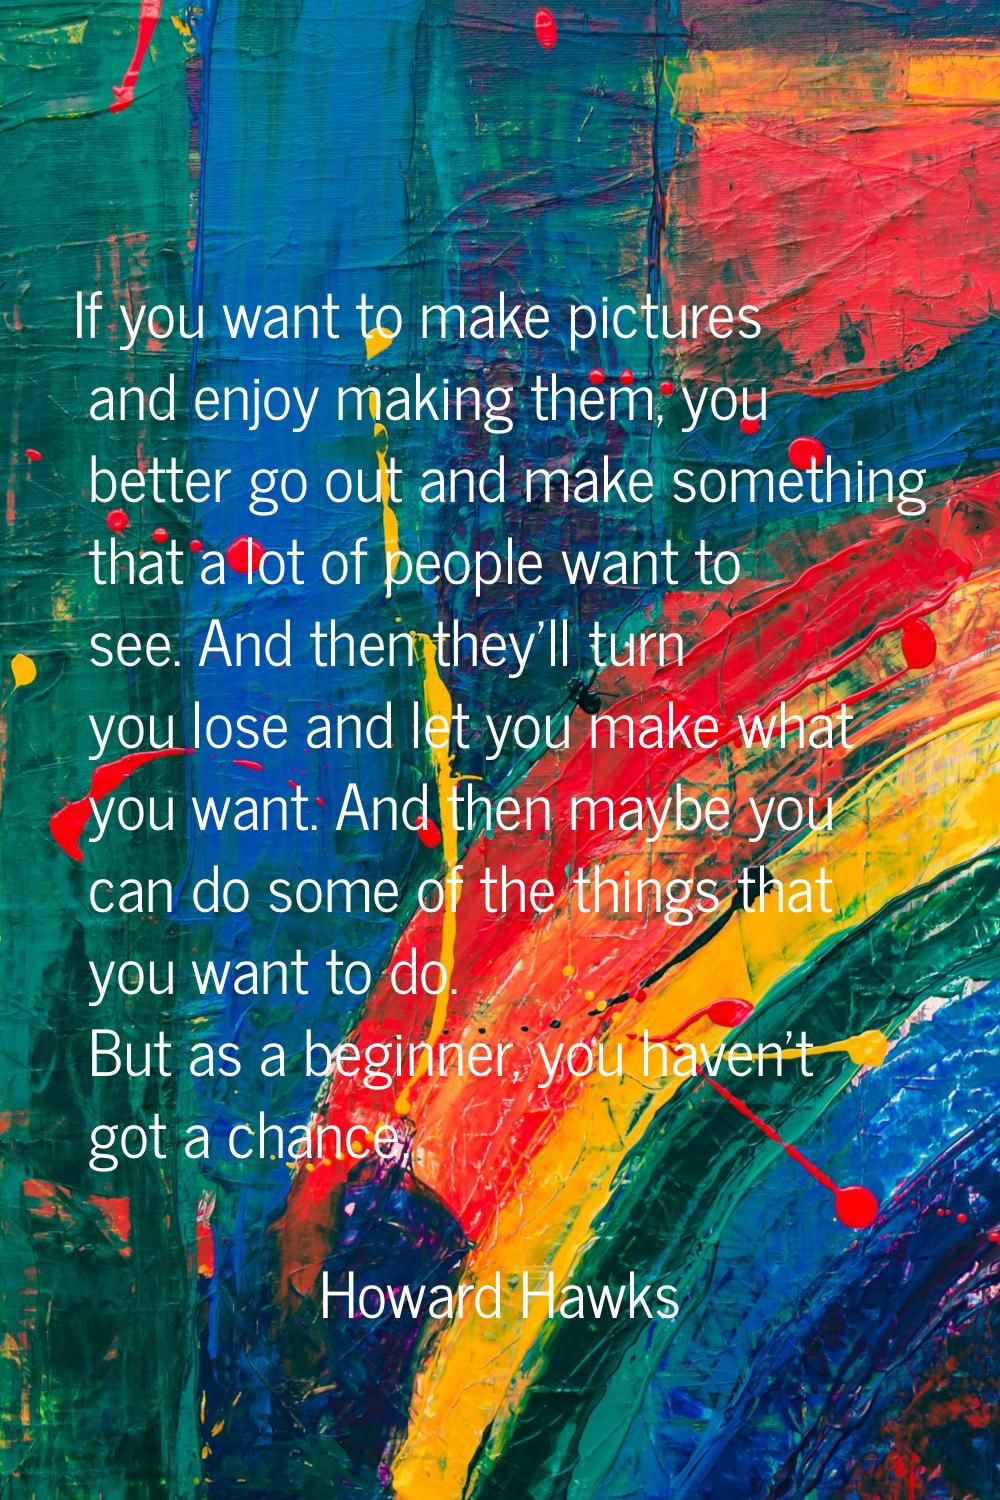 If you want to make pictures and enjoy making them, you better go out and make something that a lot